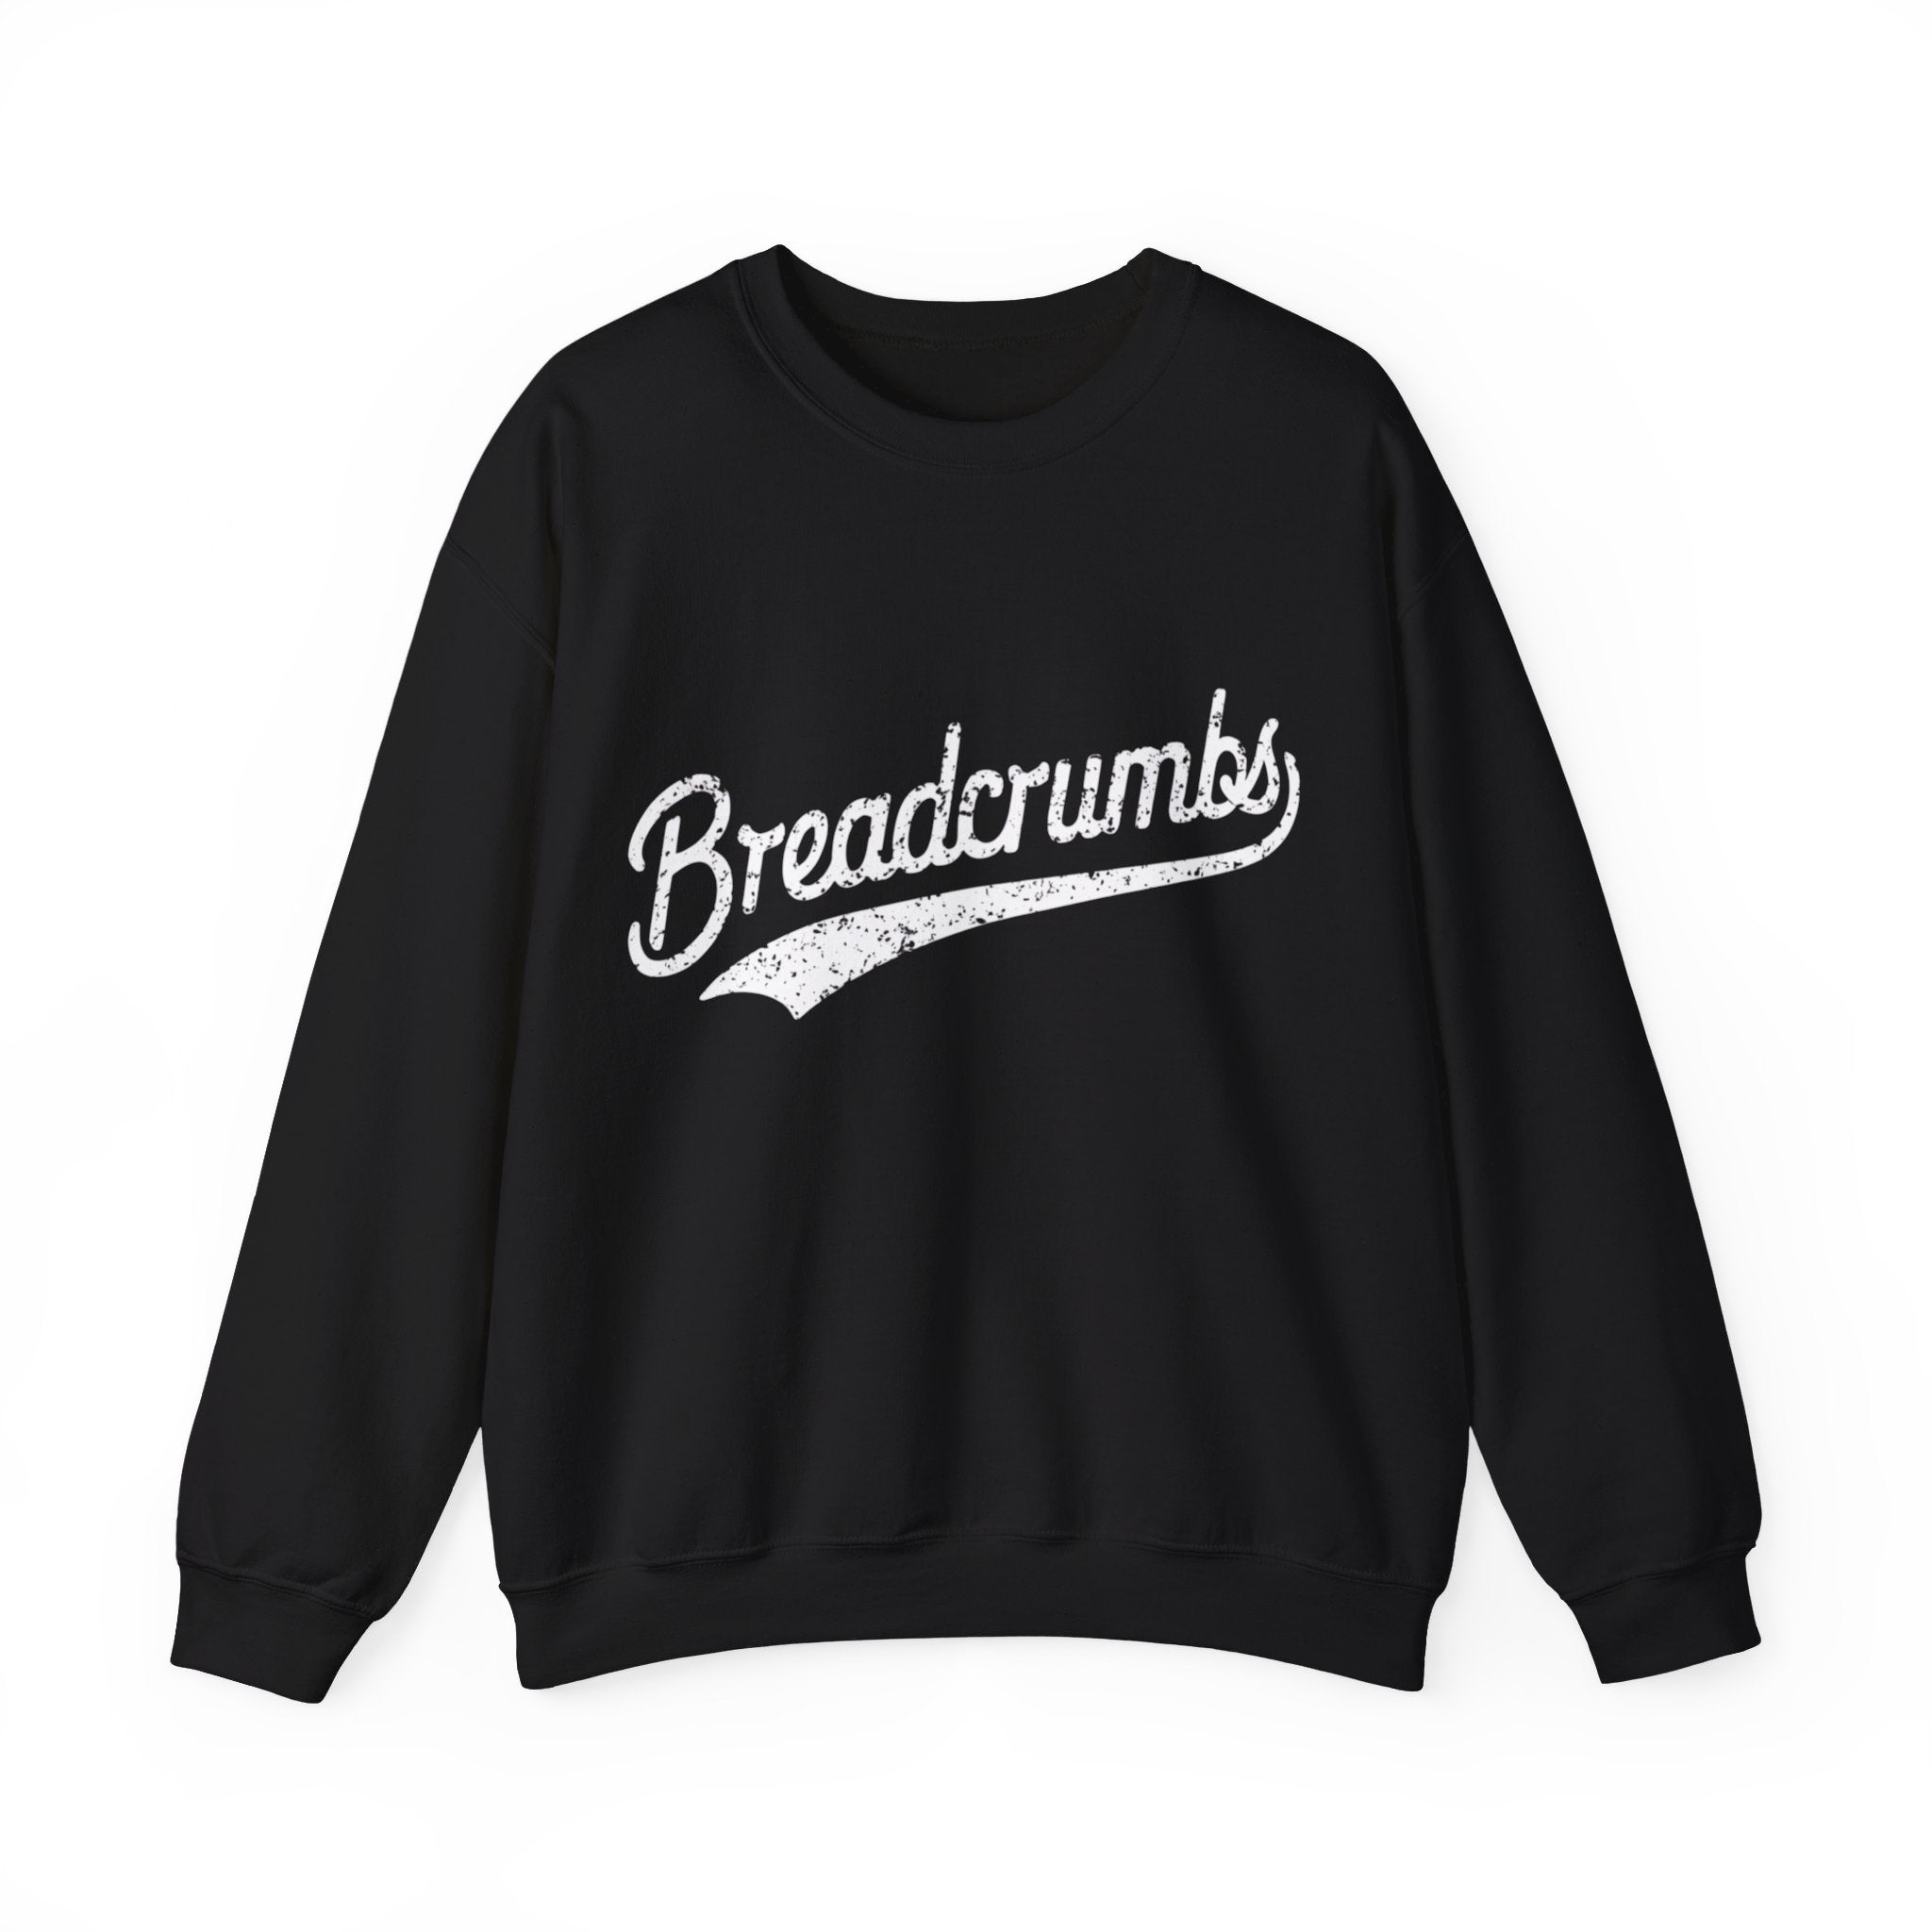 A cozy sweatshirt perfect for the colder months, this black piece features the words "Breadcrumbs - Sweatshirt" elegantly printed in white, styled in a cursive font across the front.